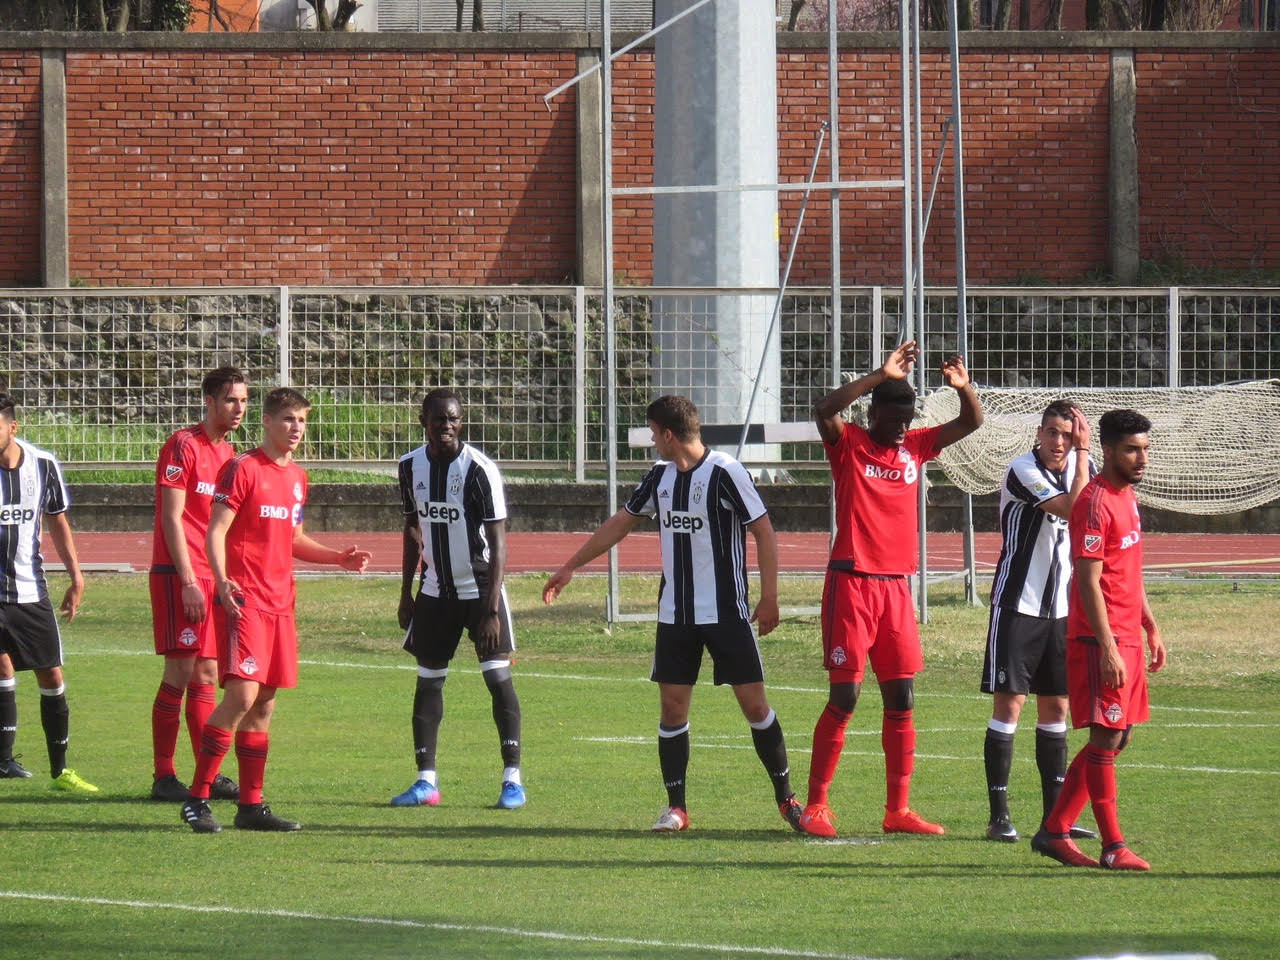 TFC III line up for free-kick against Juventus at the Viareggio Cup